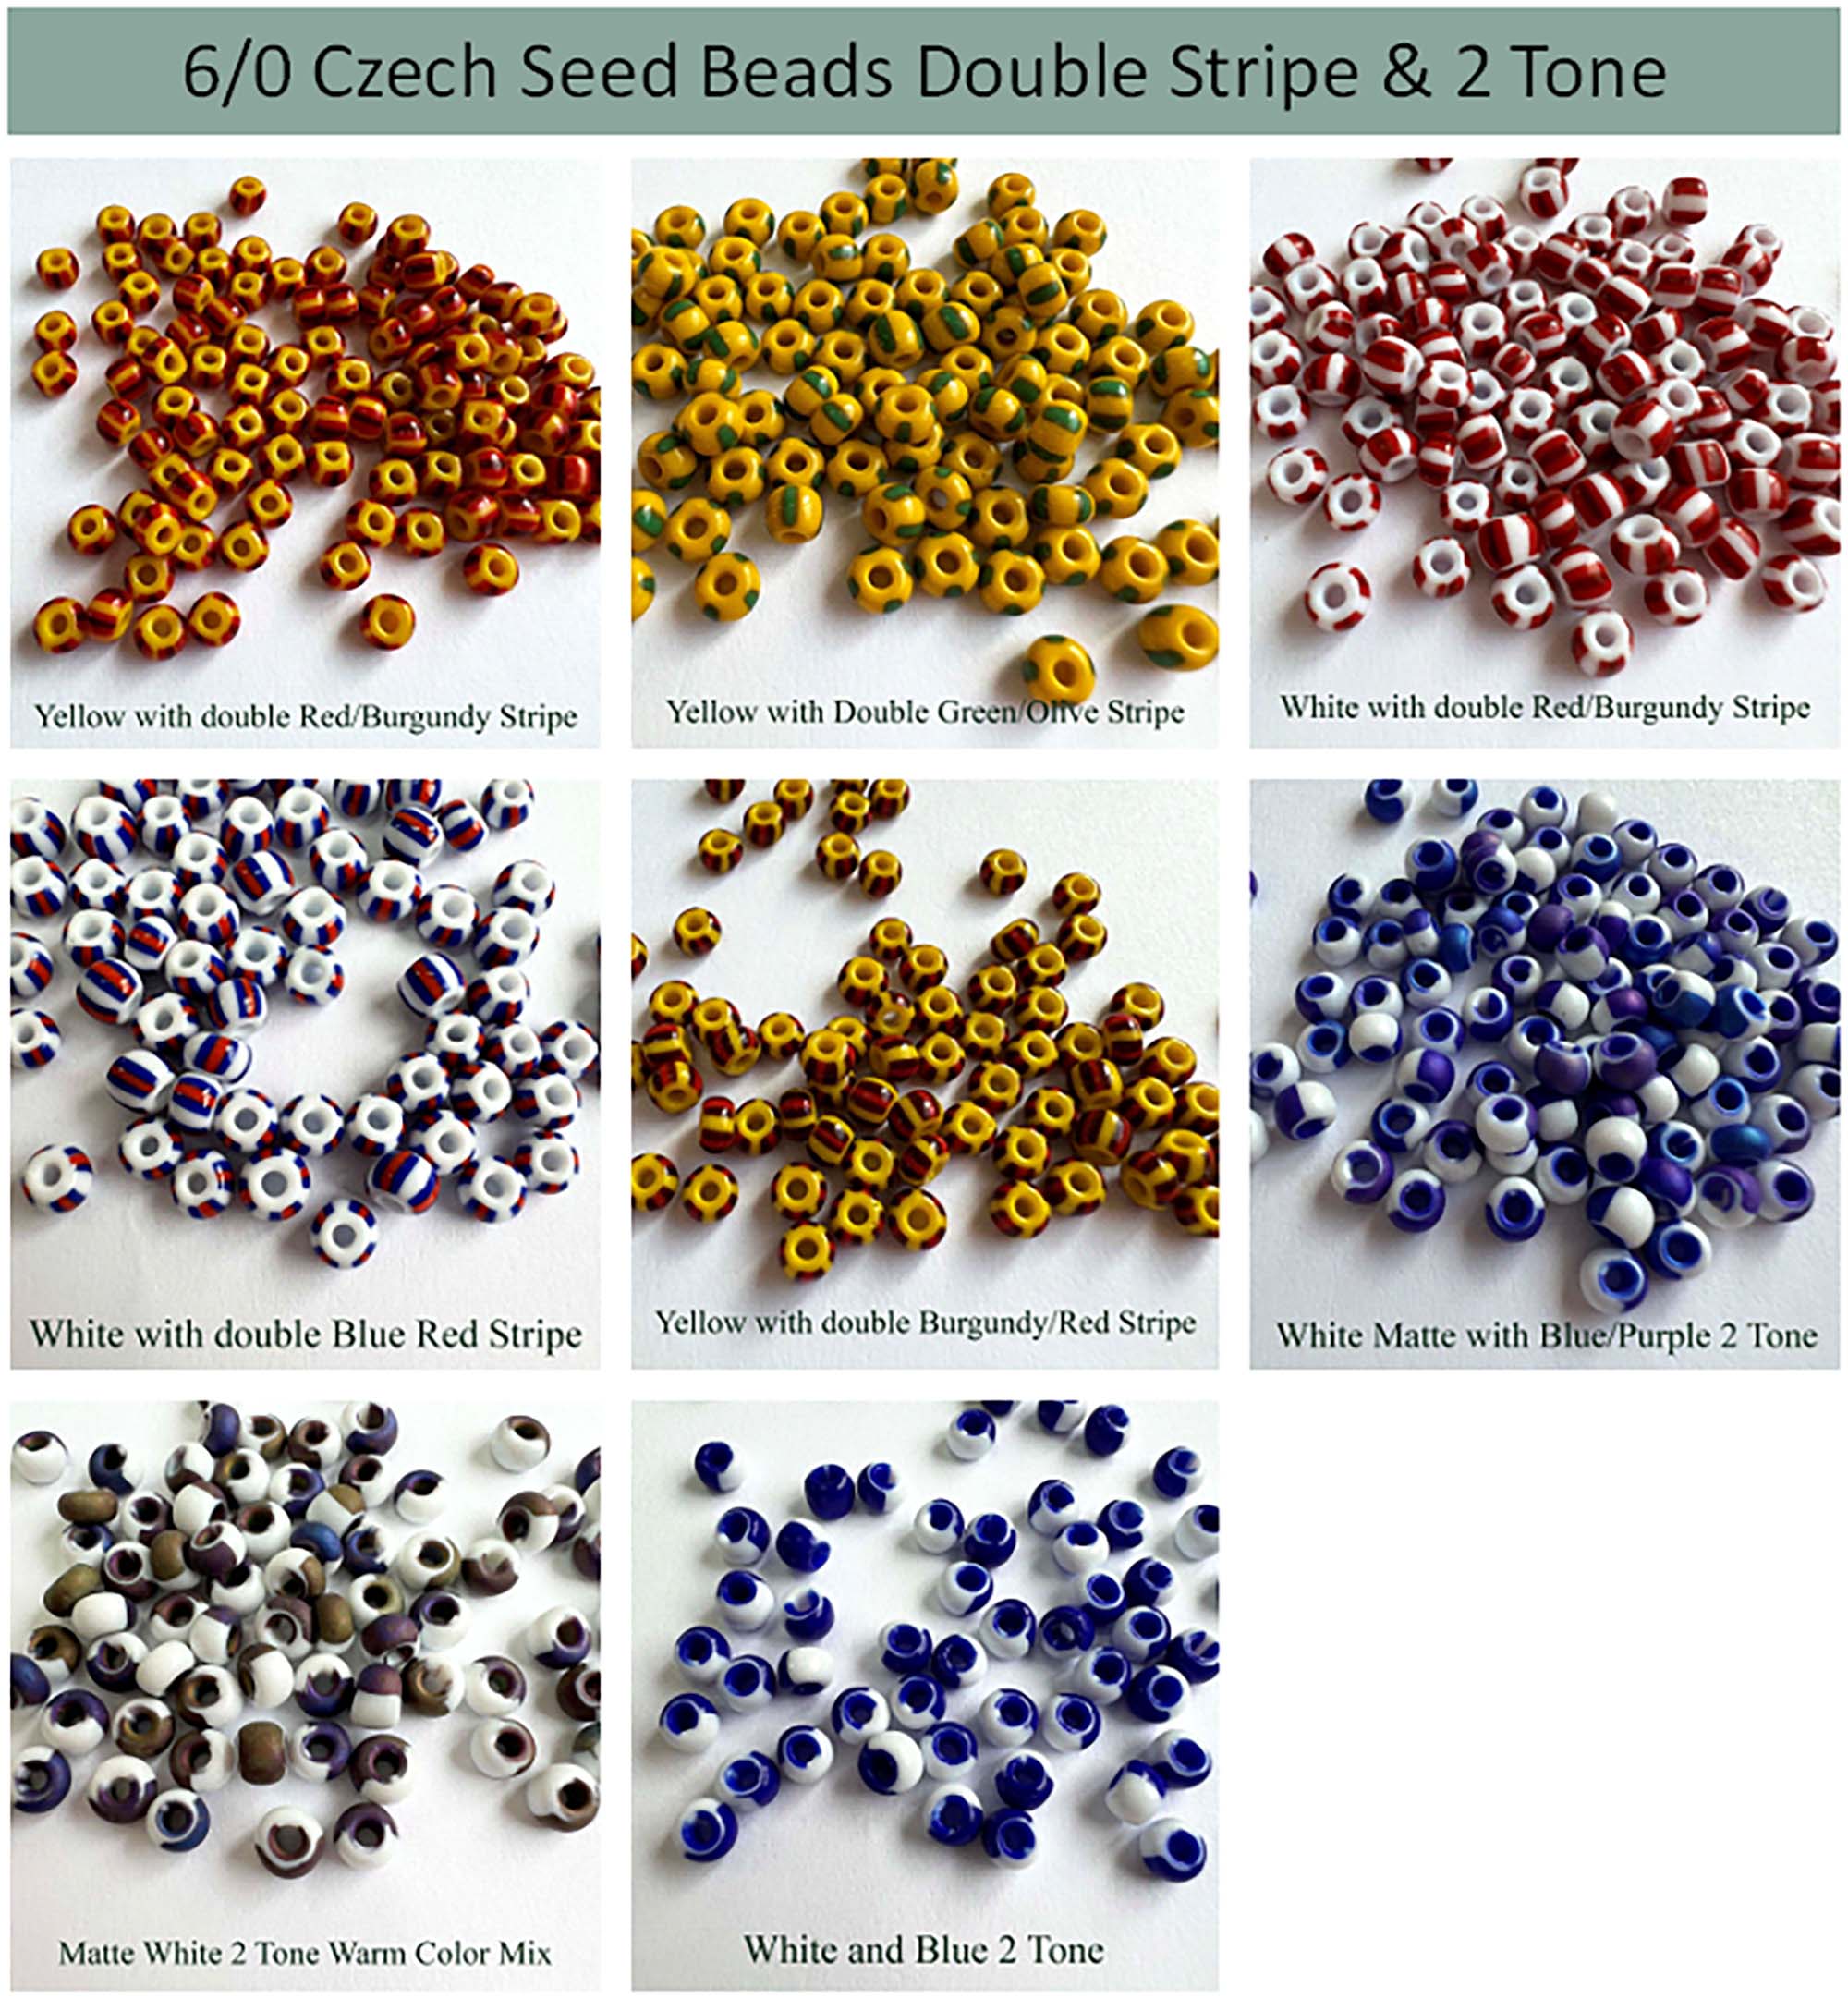 Striped Seed Beads 6/0 Small Stripe 20g Bag choose color